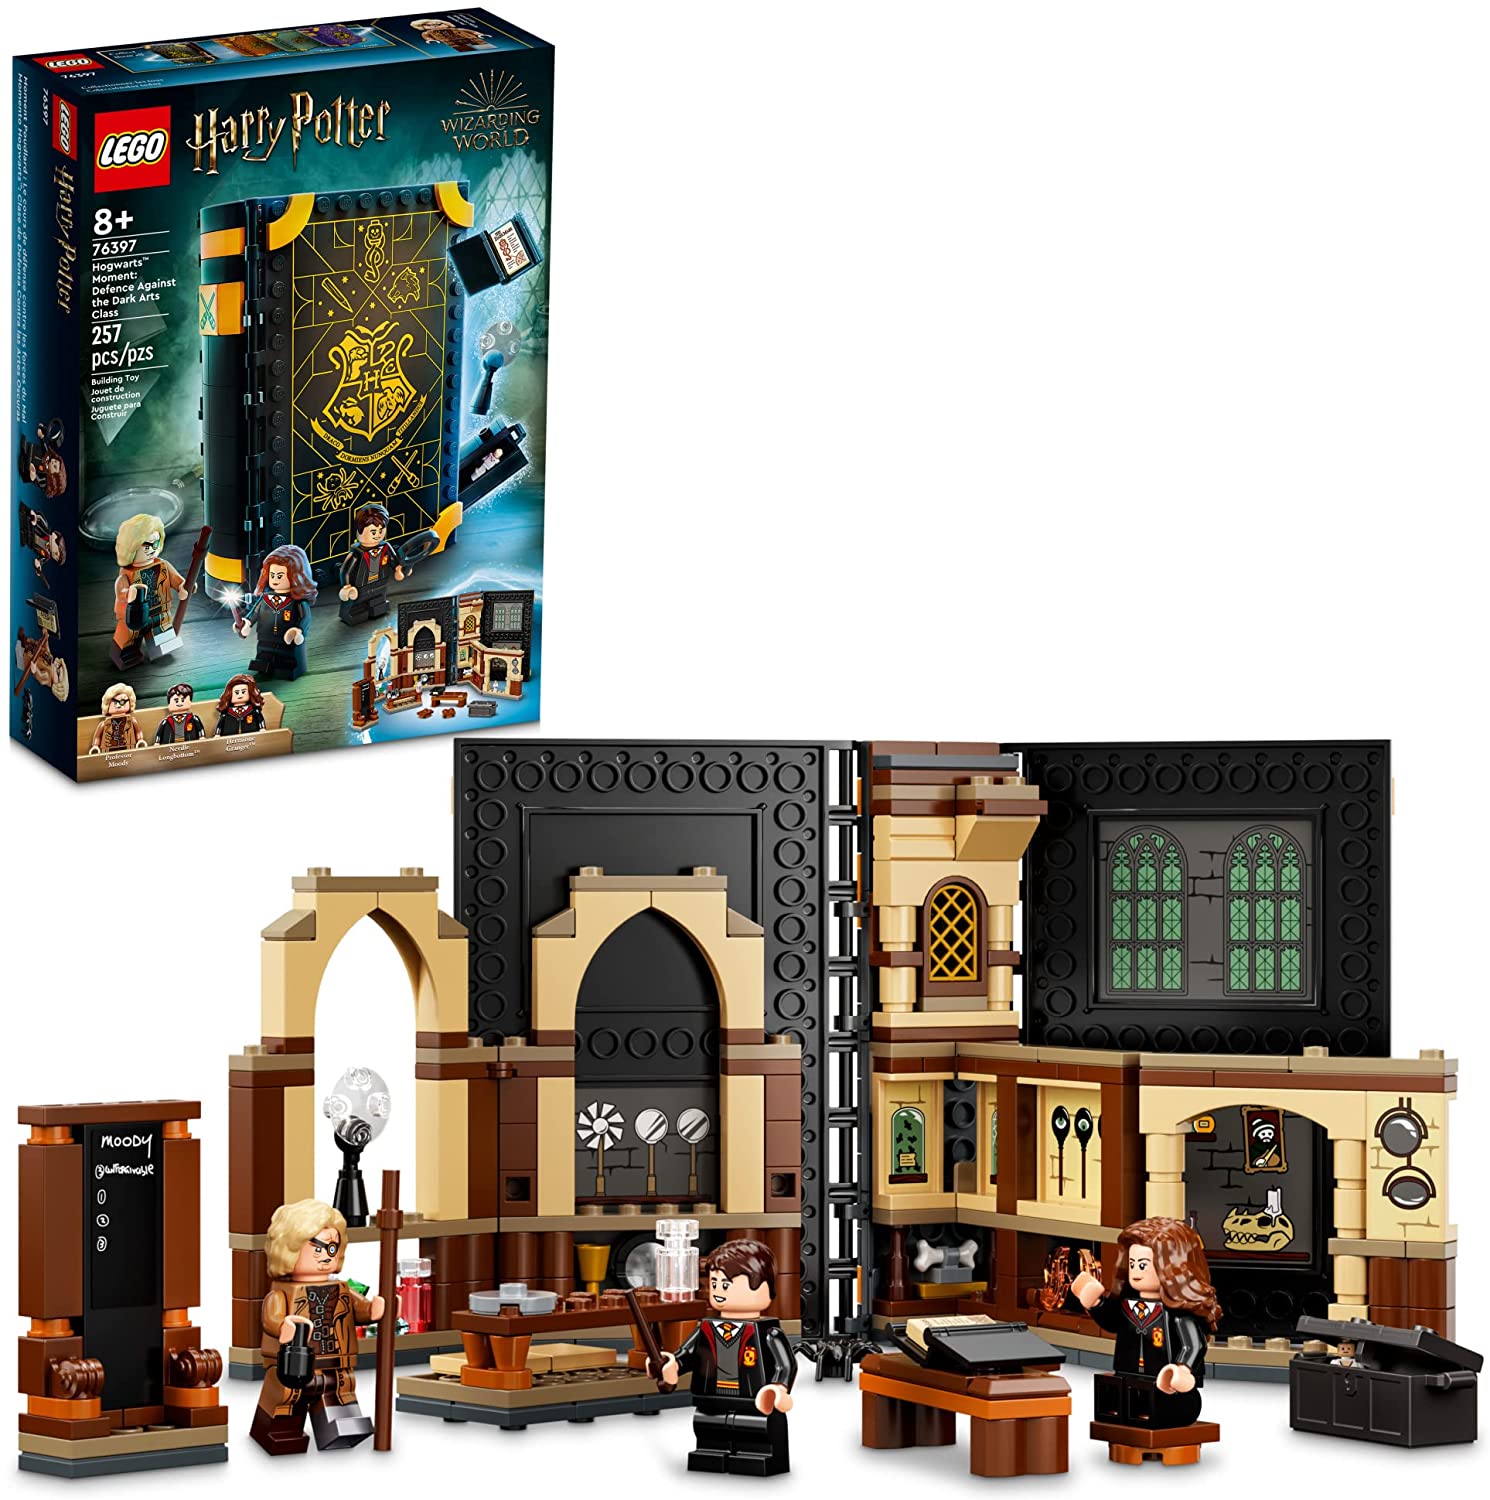 emne momentum overvældende 10 Best Lego Sets to Build in 2022: Star Wars, Harry Potter and More |  Entertainment Tonight